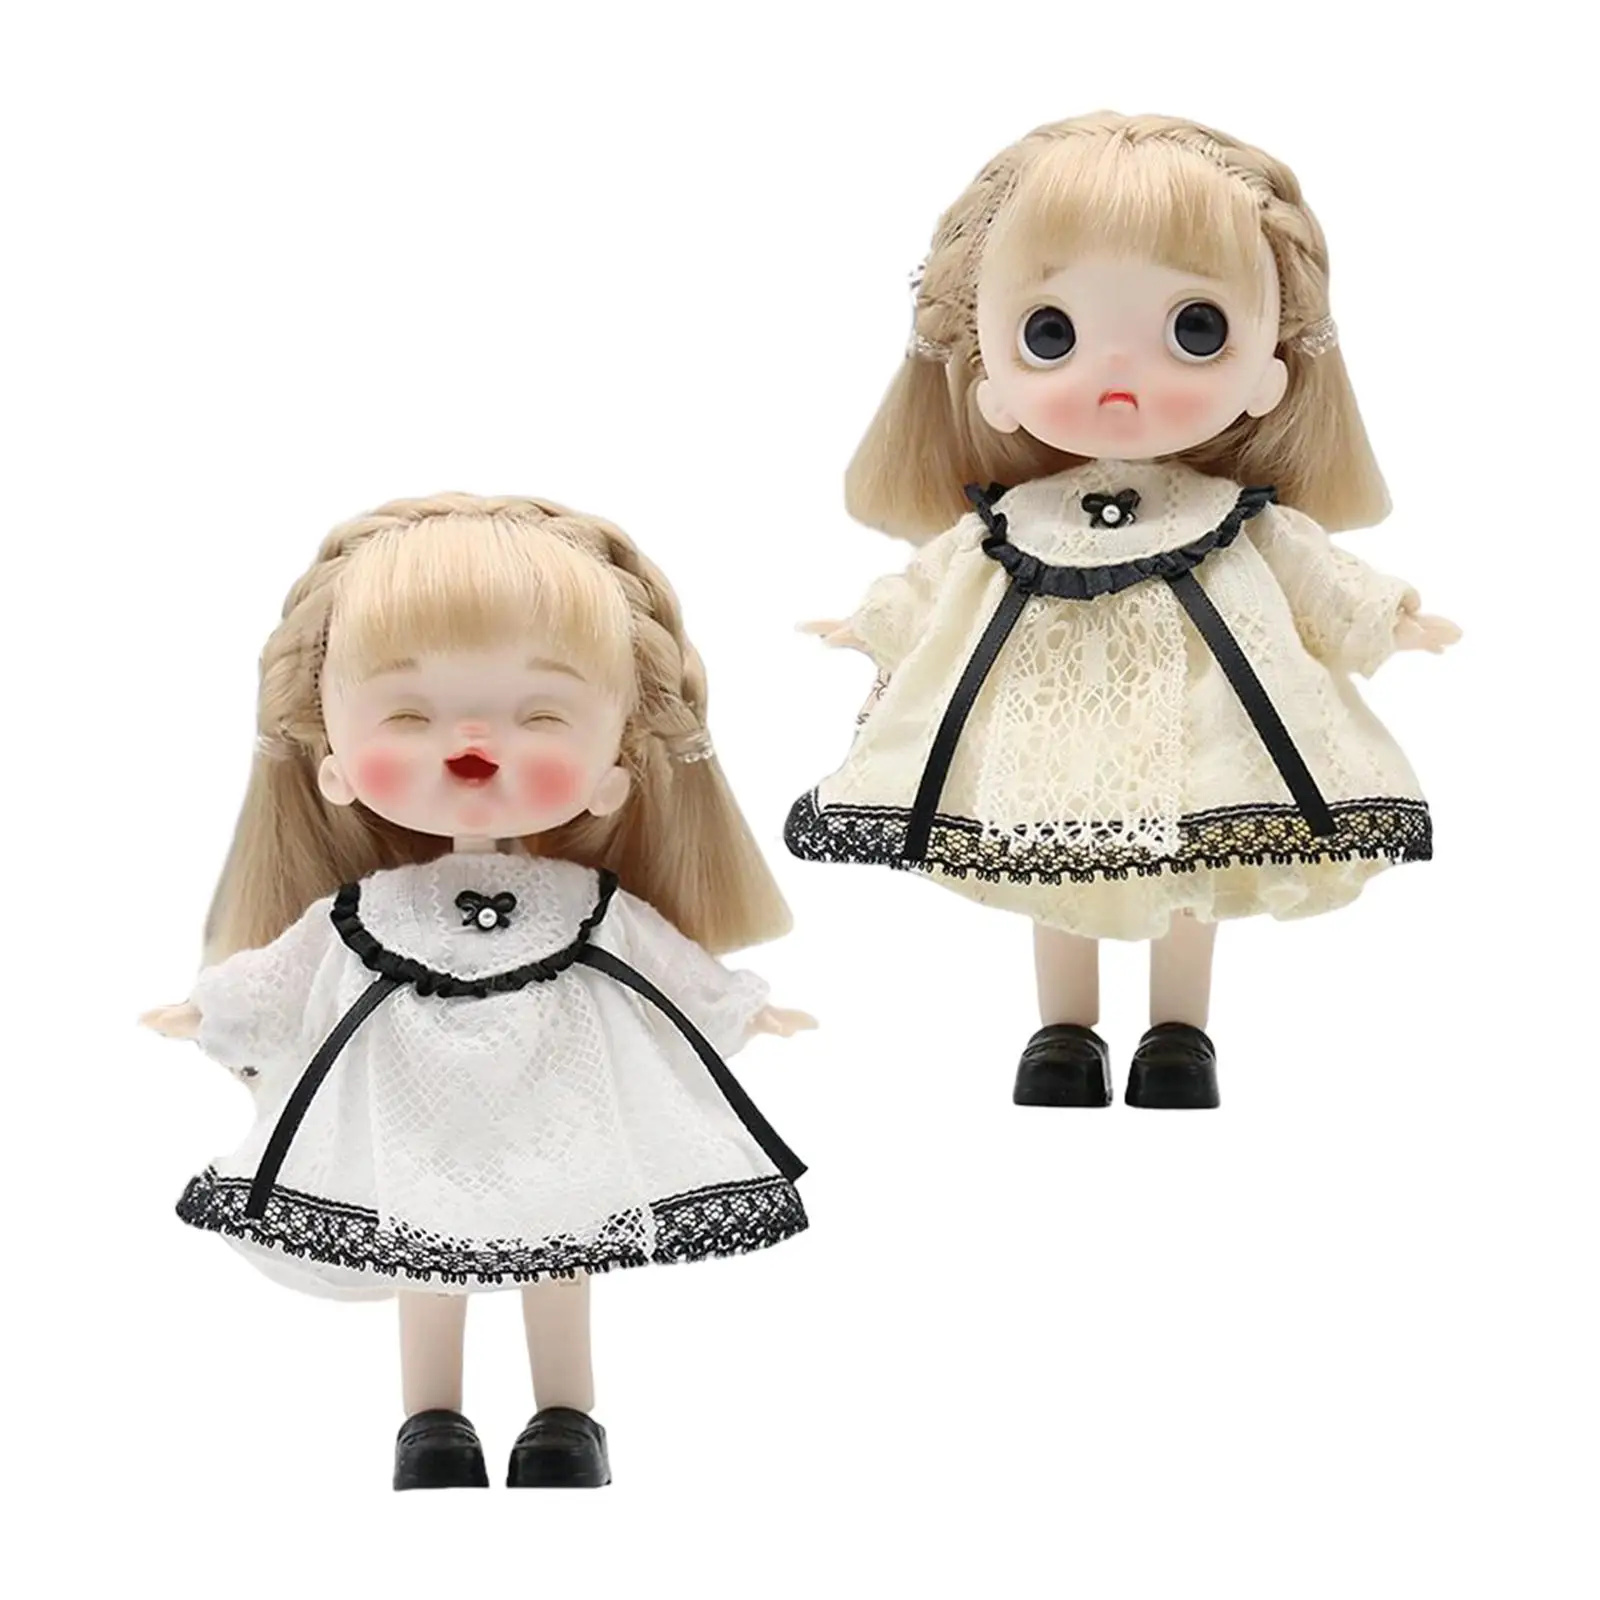 Ball Joints Doll 14cm Kids Girls Toys makeup Doll for Birthday Graduation Gifts